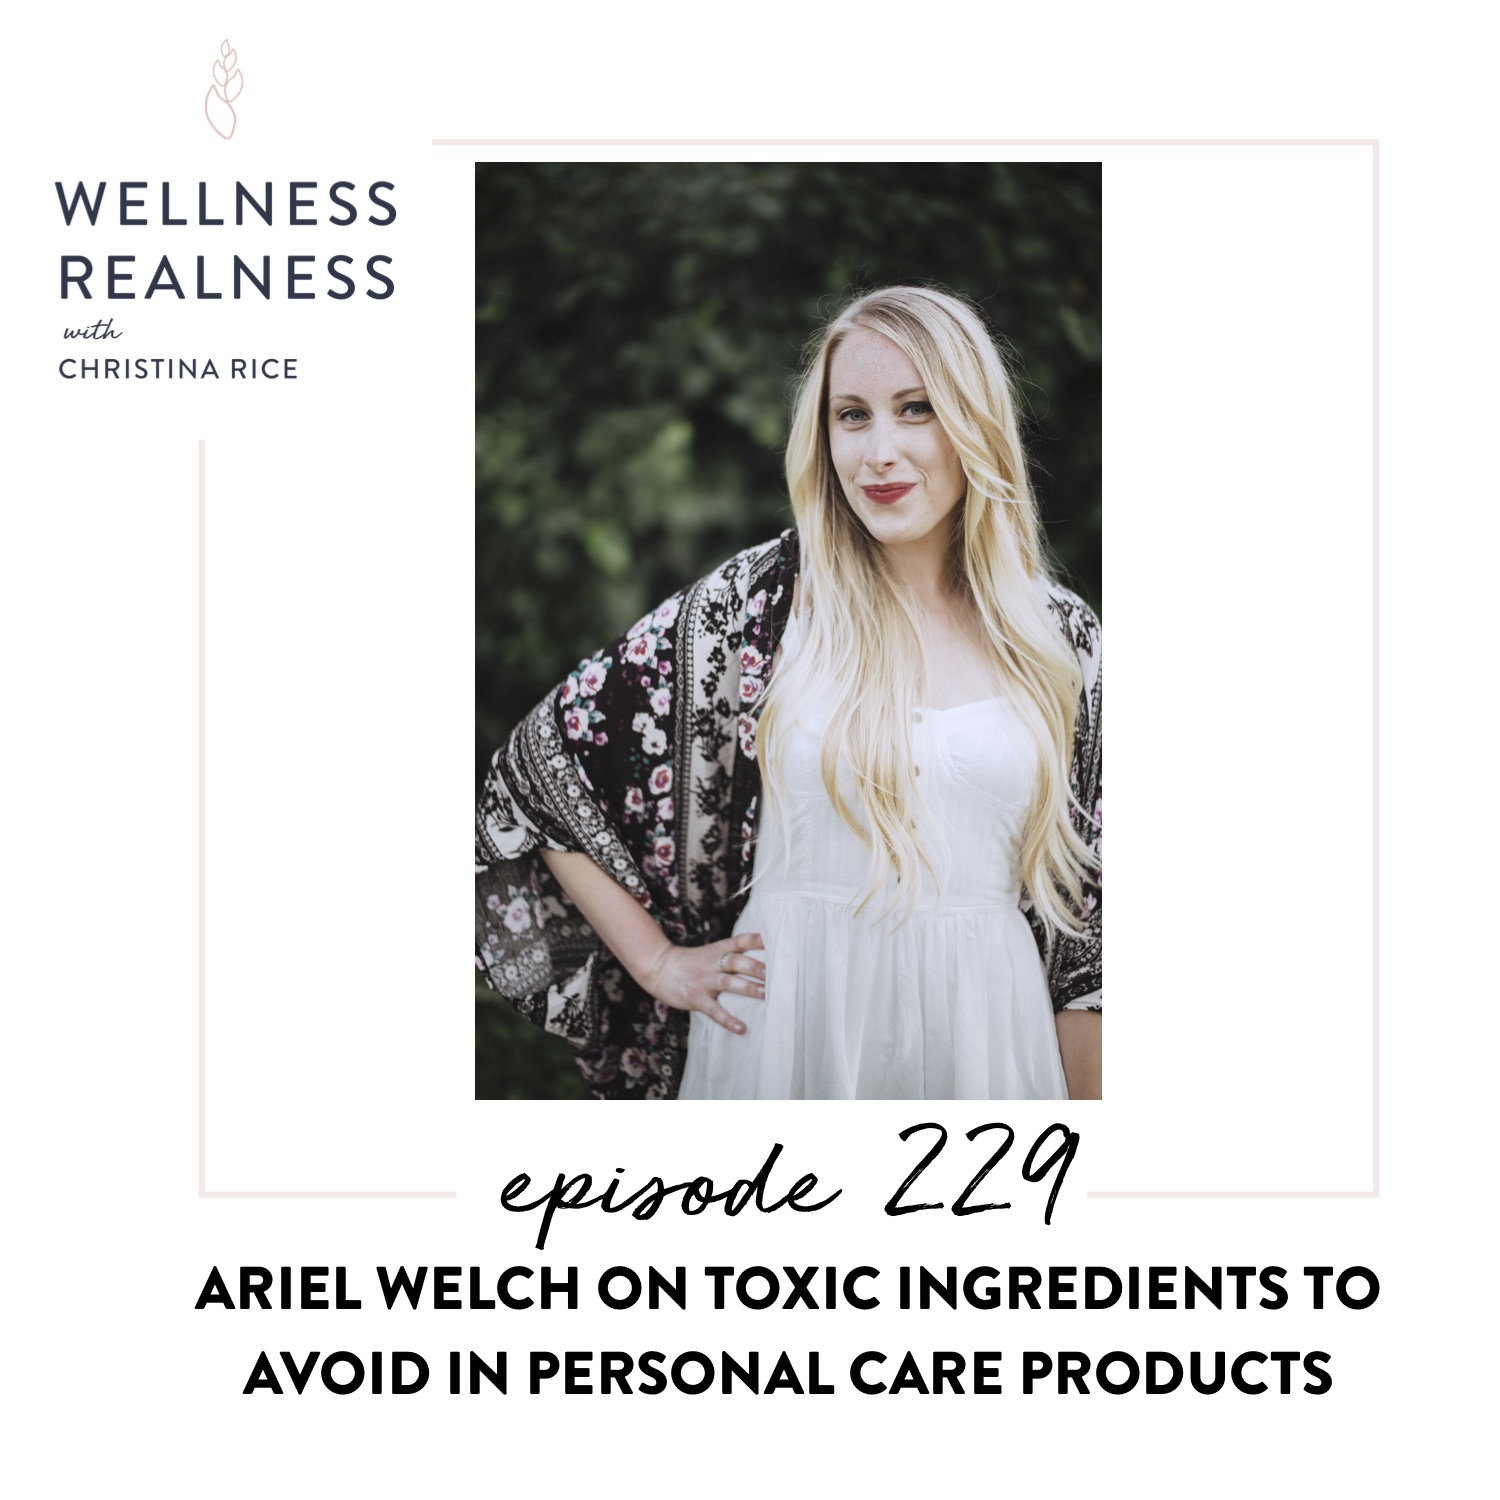 229: Ariel Welch on Toxic Ingredients to Avoid in Personal Care Products